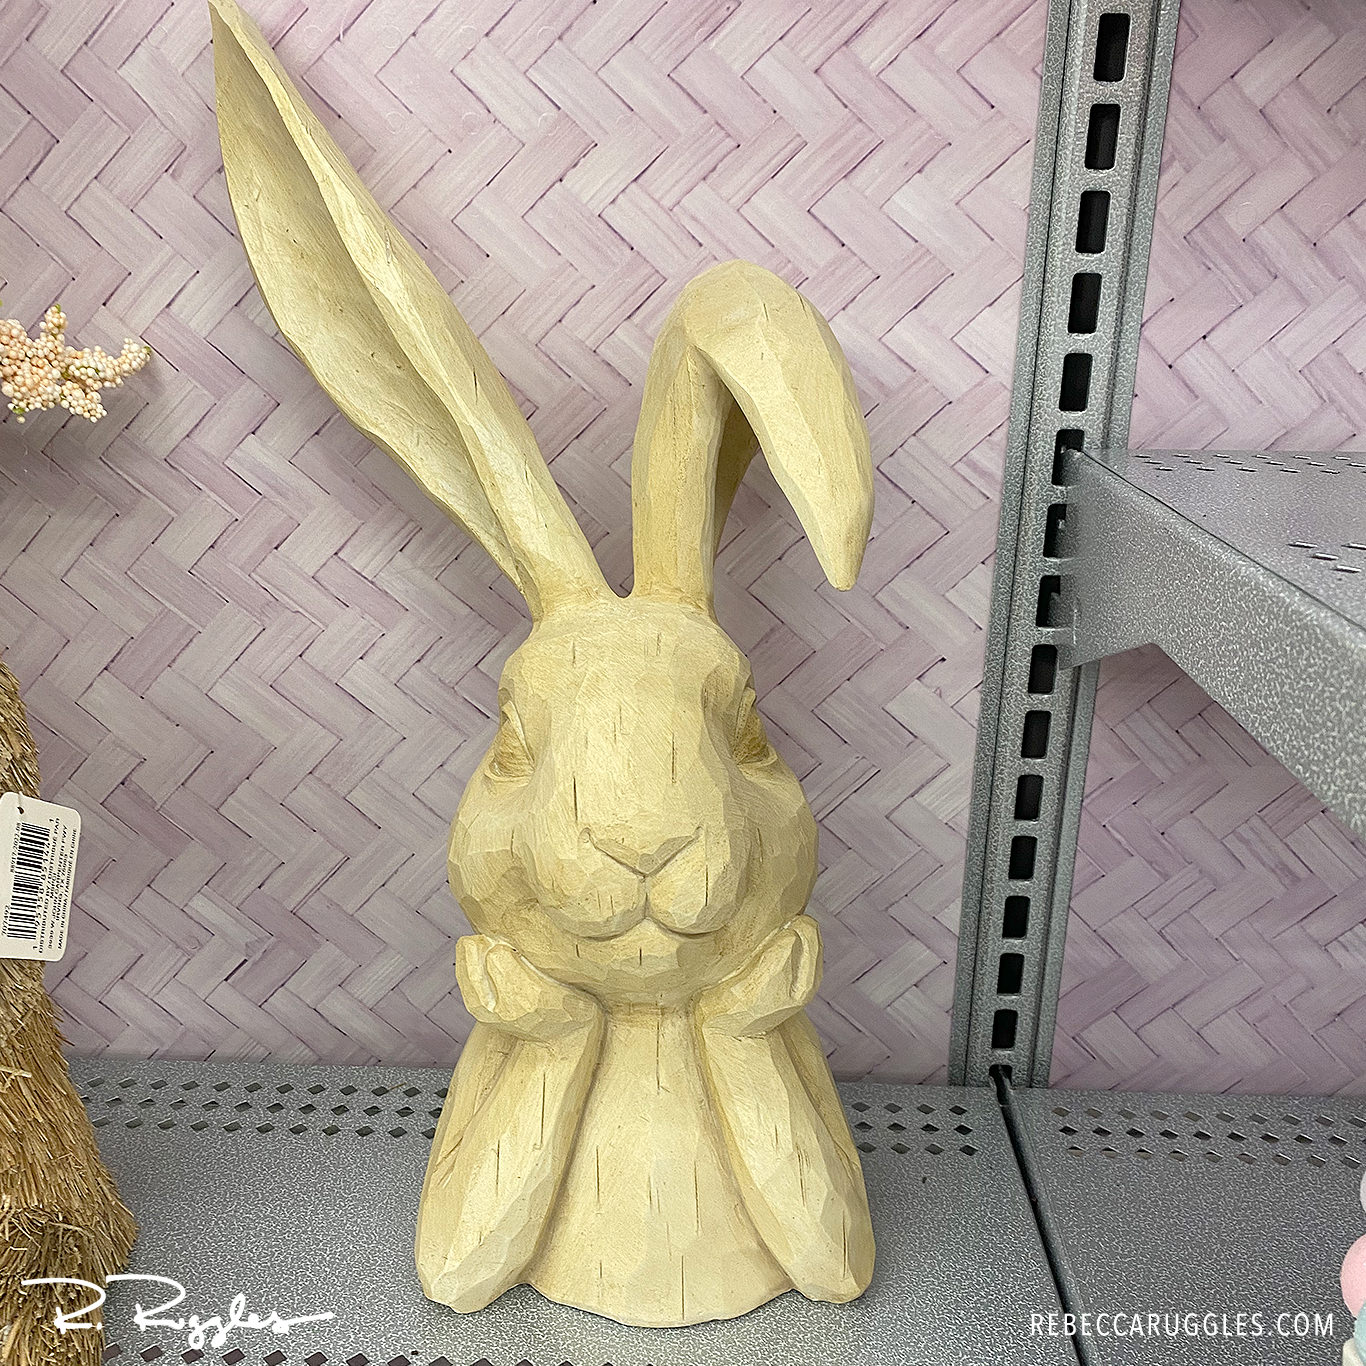 The original bunny statue I bought at Michael's Carfts Store